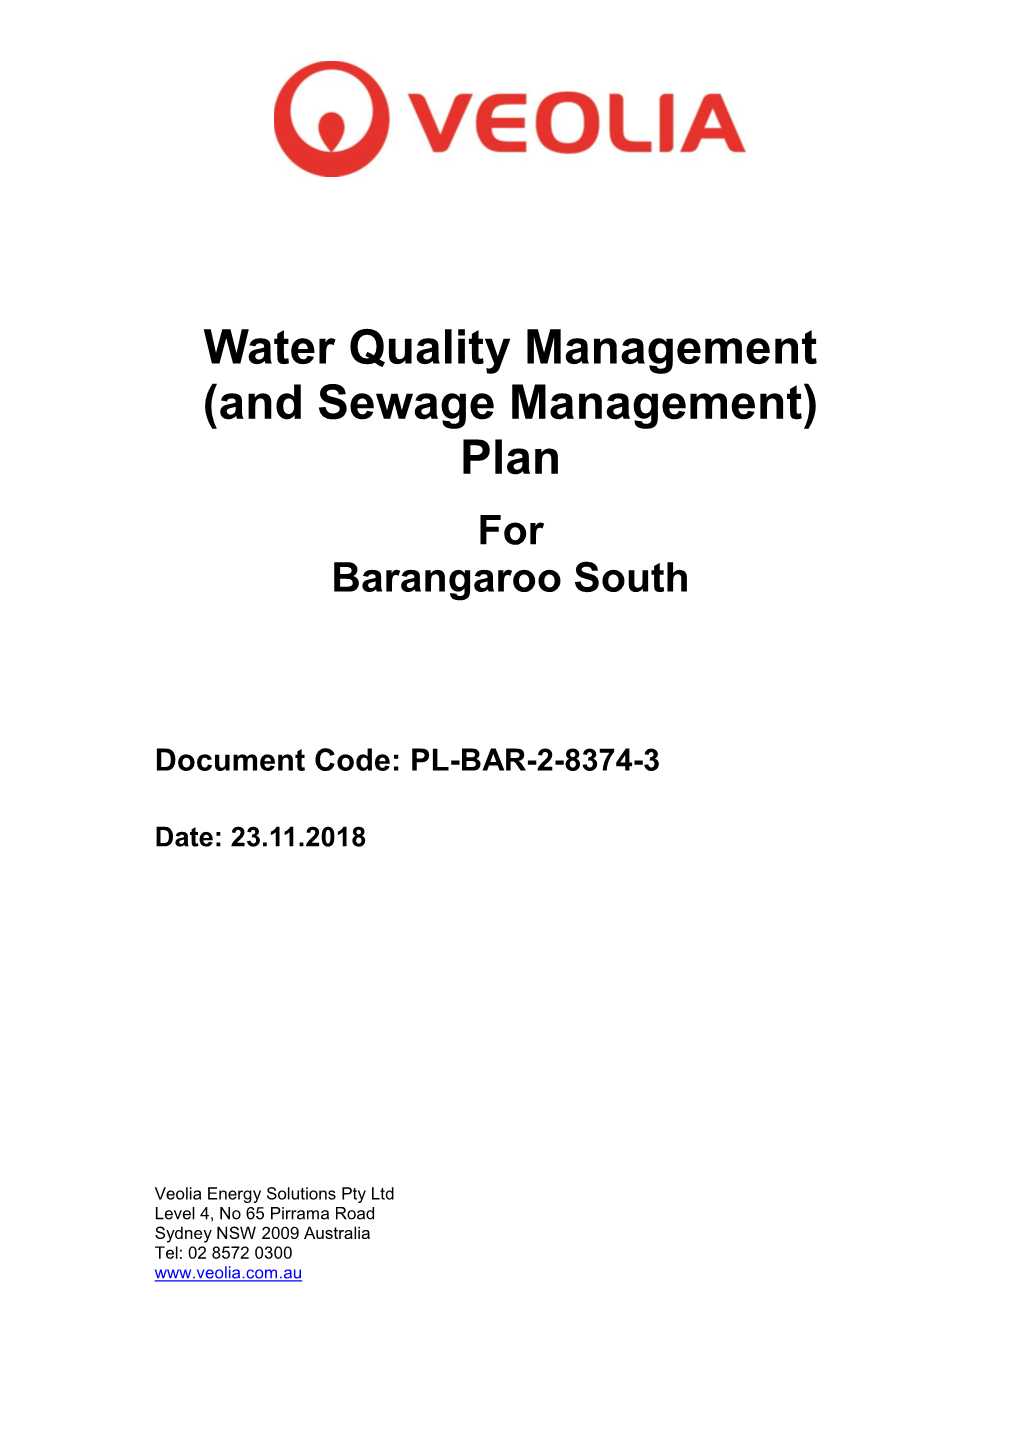 Water Quality Management (And Sewage Management) Plan